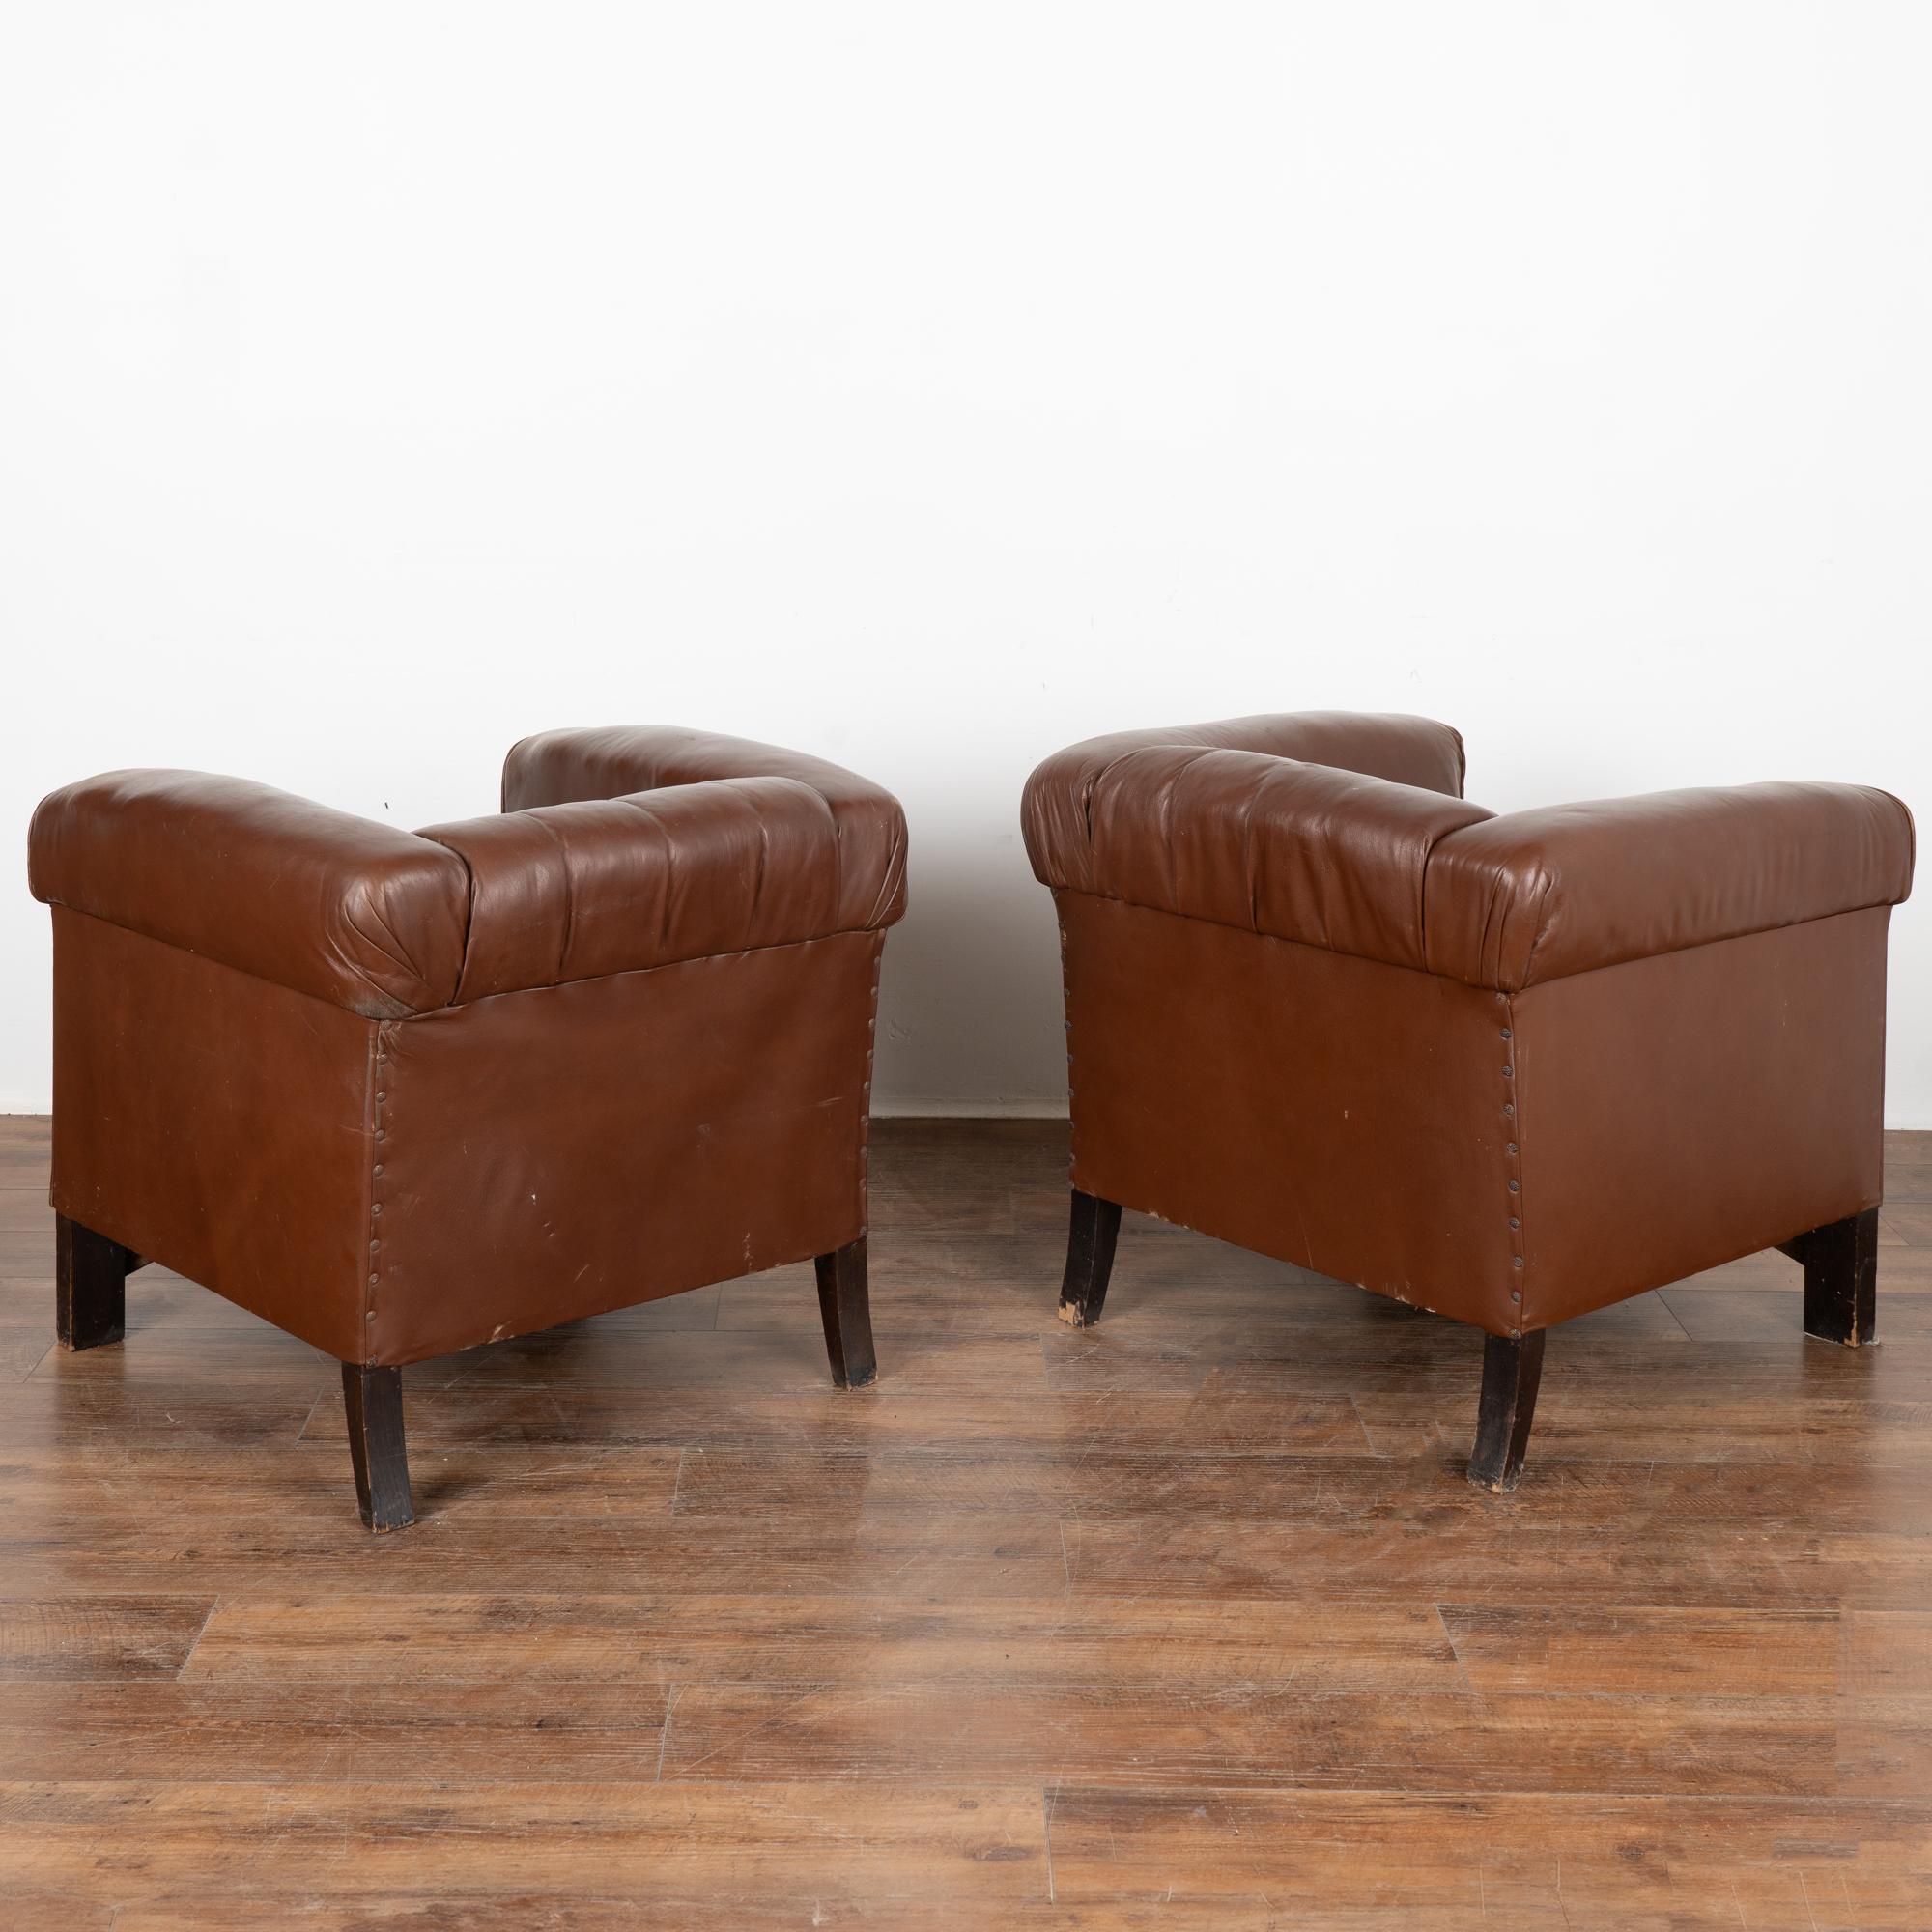 Set of 3, Vintage Brown Leather Sofa and Pair of Club Chairs, Denmark circa 1960 For Sale 7